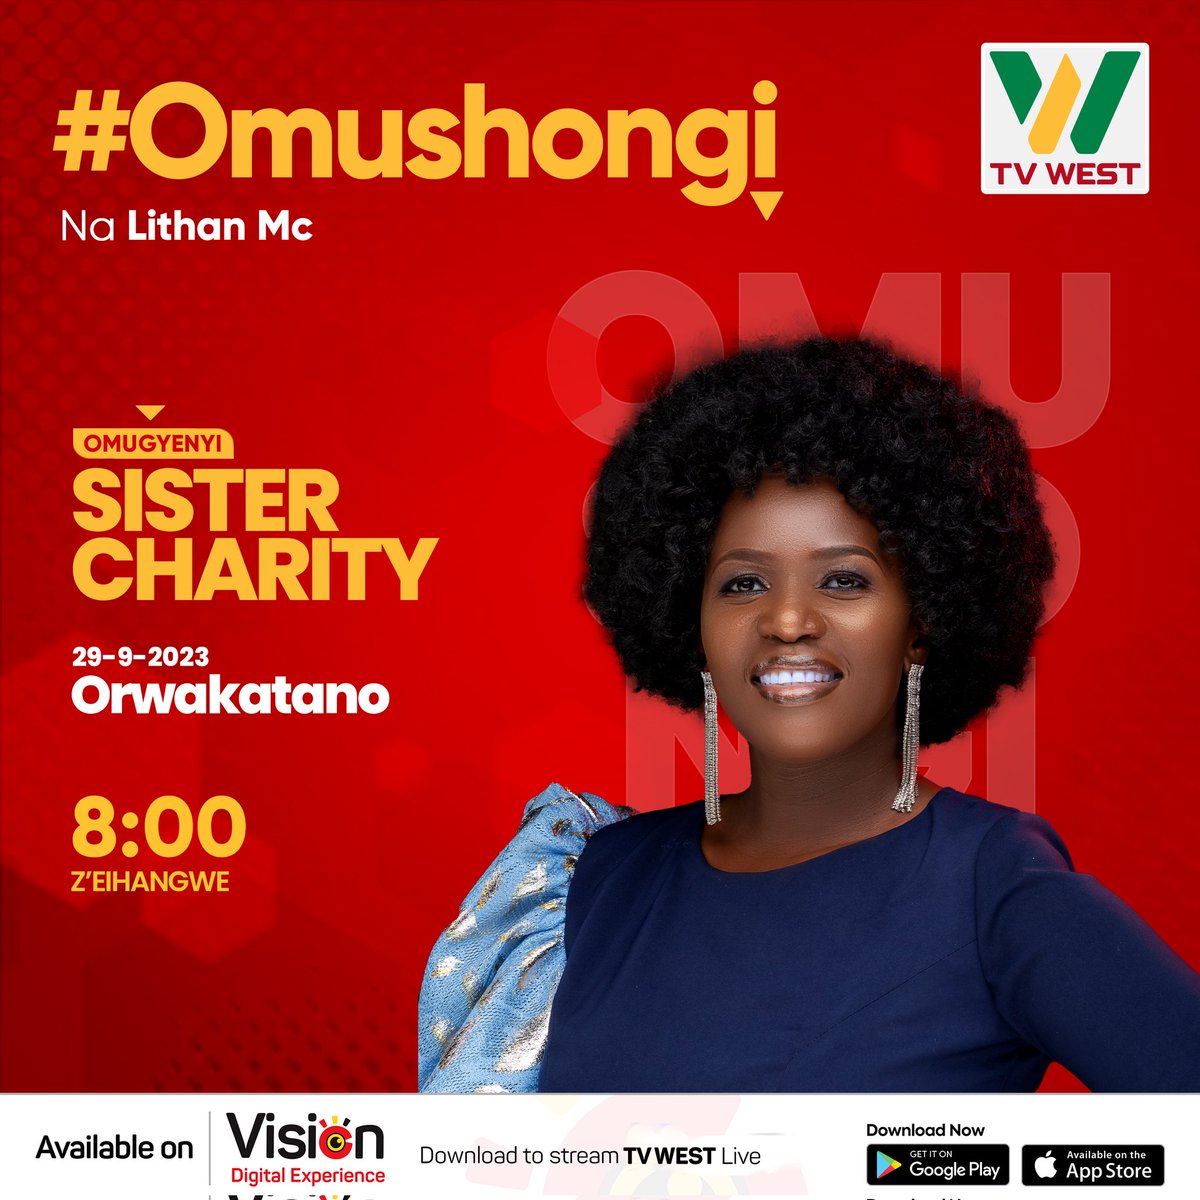 Good evening 😊...I'll be live on @tvwestUG tomorrow @2pm on #Omushongi program hosted by @Lithan_Mc1 .. please tune in if u can 🥰🙏🏼
#omuntu video available on YouTube.. link 👇🏽

youtu.be/tqVSPCX_Drk?si…

#MuchLove 
#sistercharity